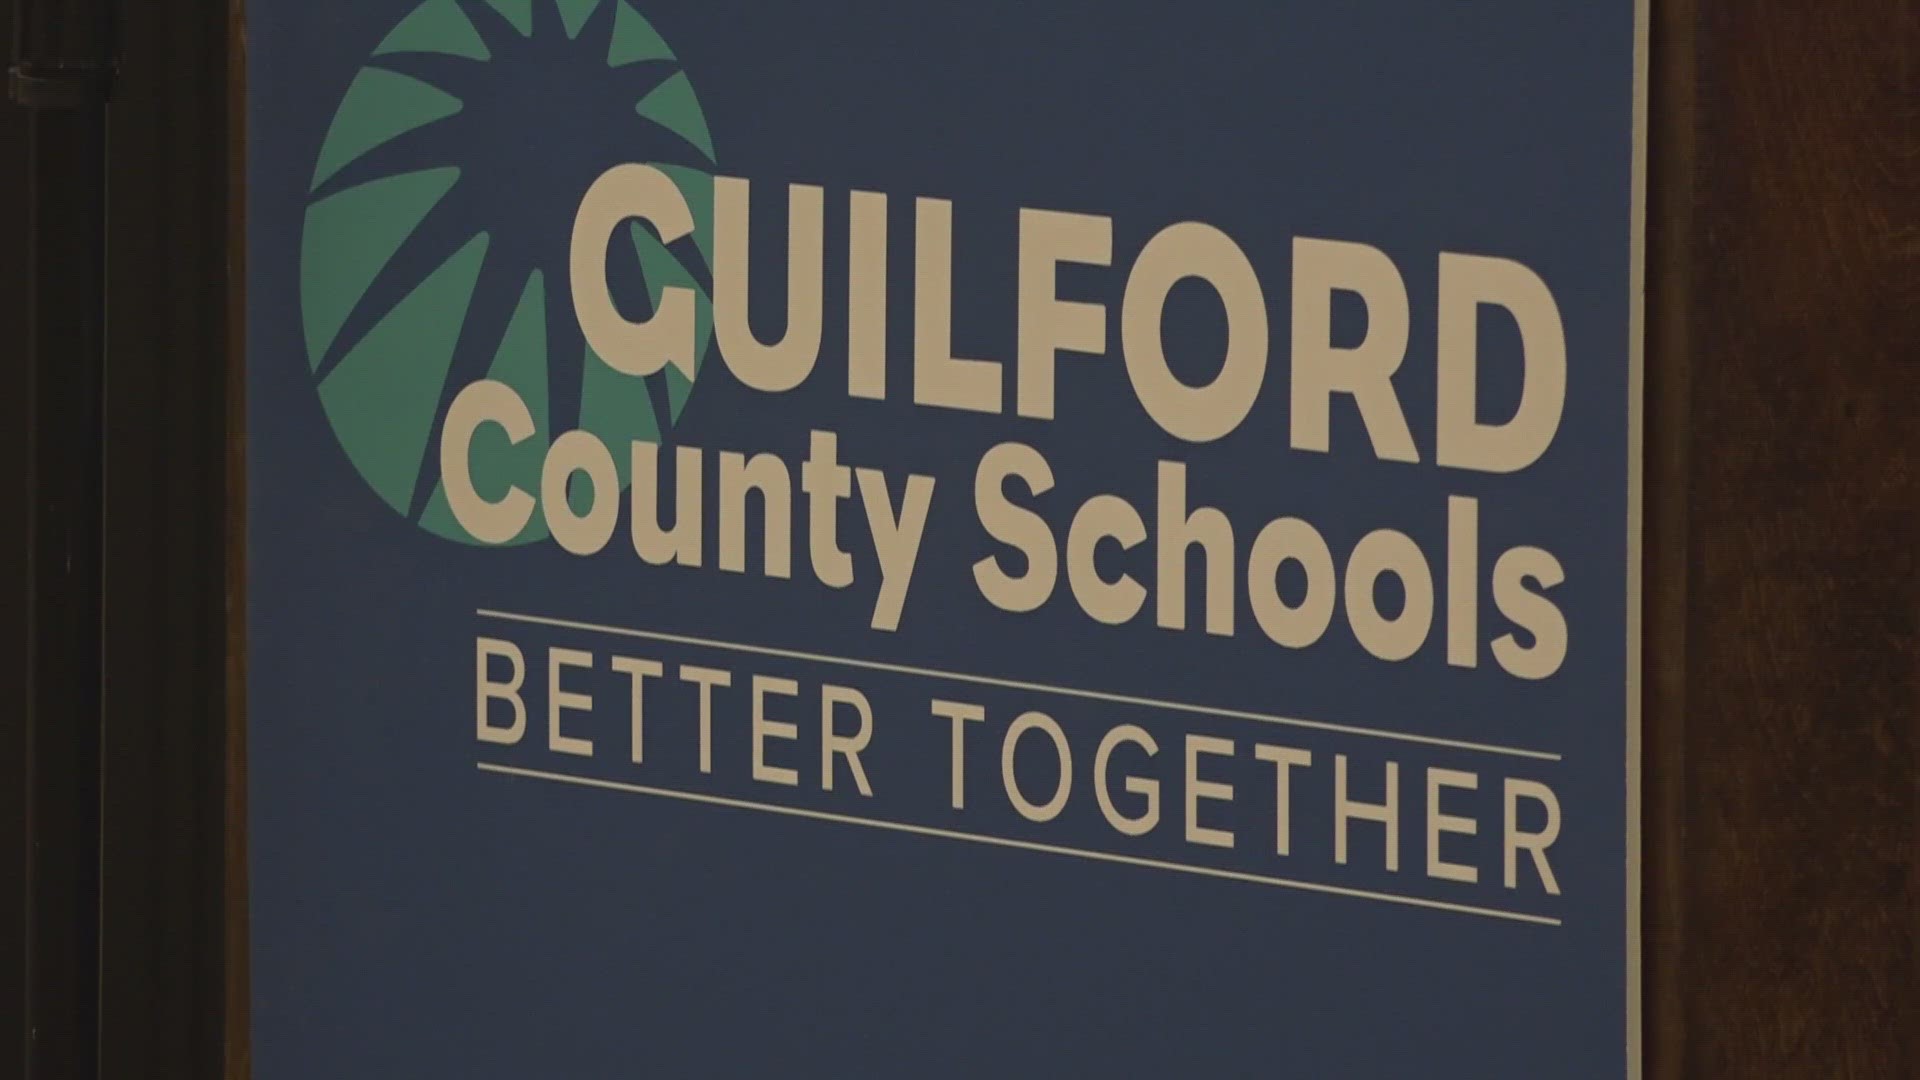 Bill Goebel is attempting to run for a seat on the Guilford County Schools Board of Education.